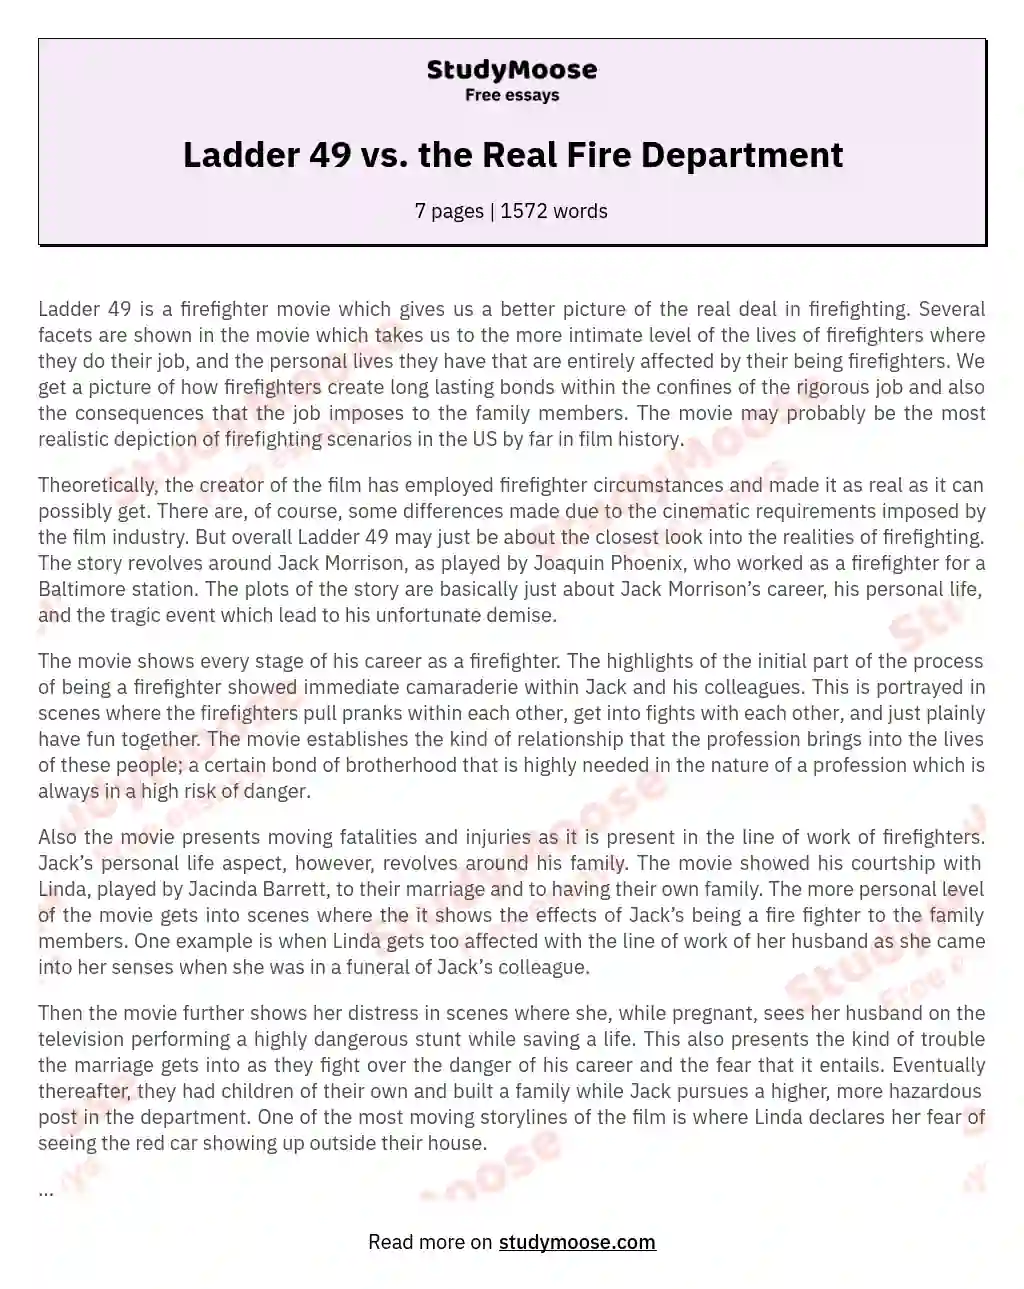 Ladder 49 vs. the Real Fire Department essay